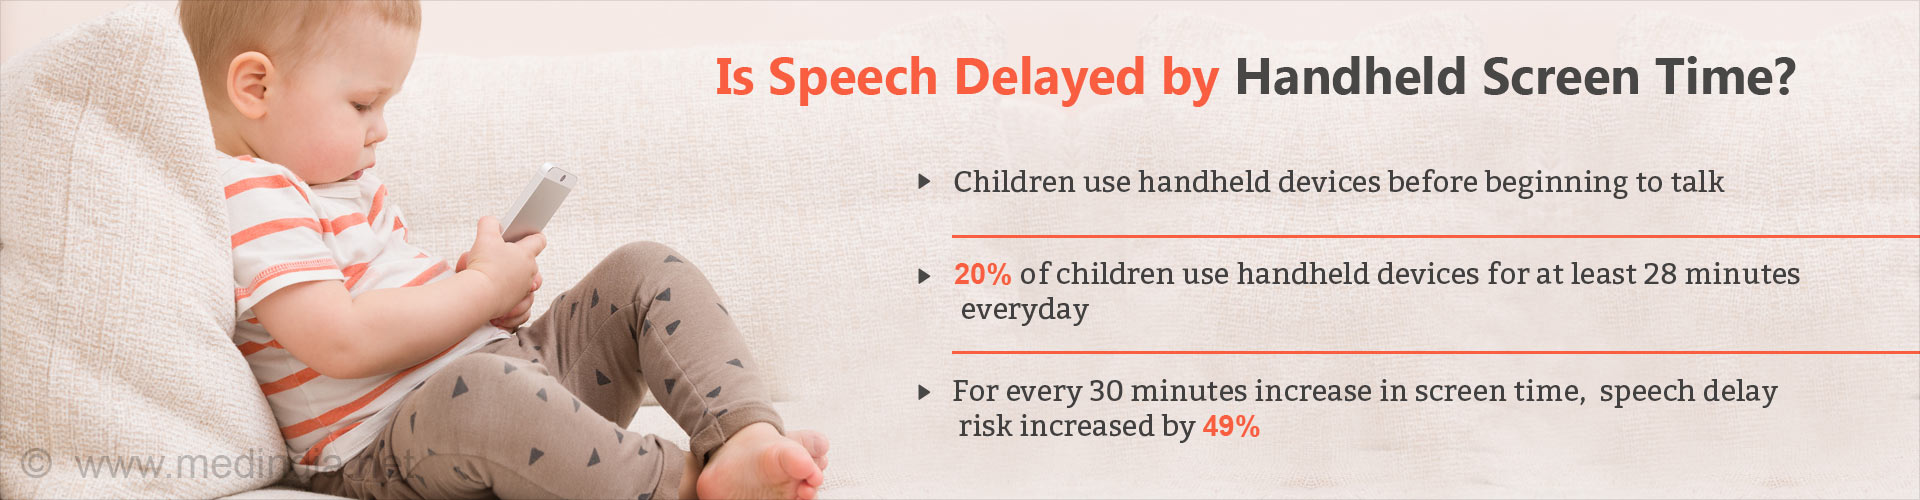 Is Speech Delayed by Handheld Screen Time?
- Children use handheld devices before beginning to talk
- 20% of children use handheld devices for atleast 28 minutes everyday
- For every 30 minutes increase in screentime, speech delay risk increased by 49%